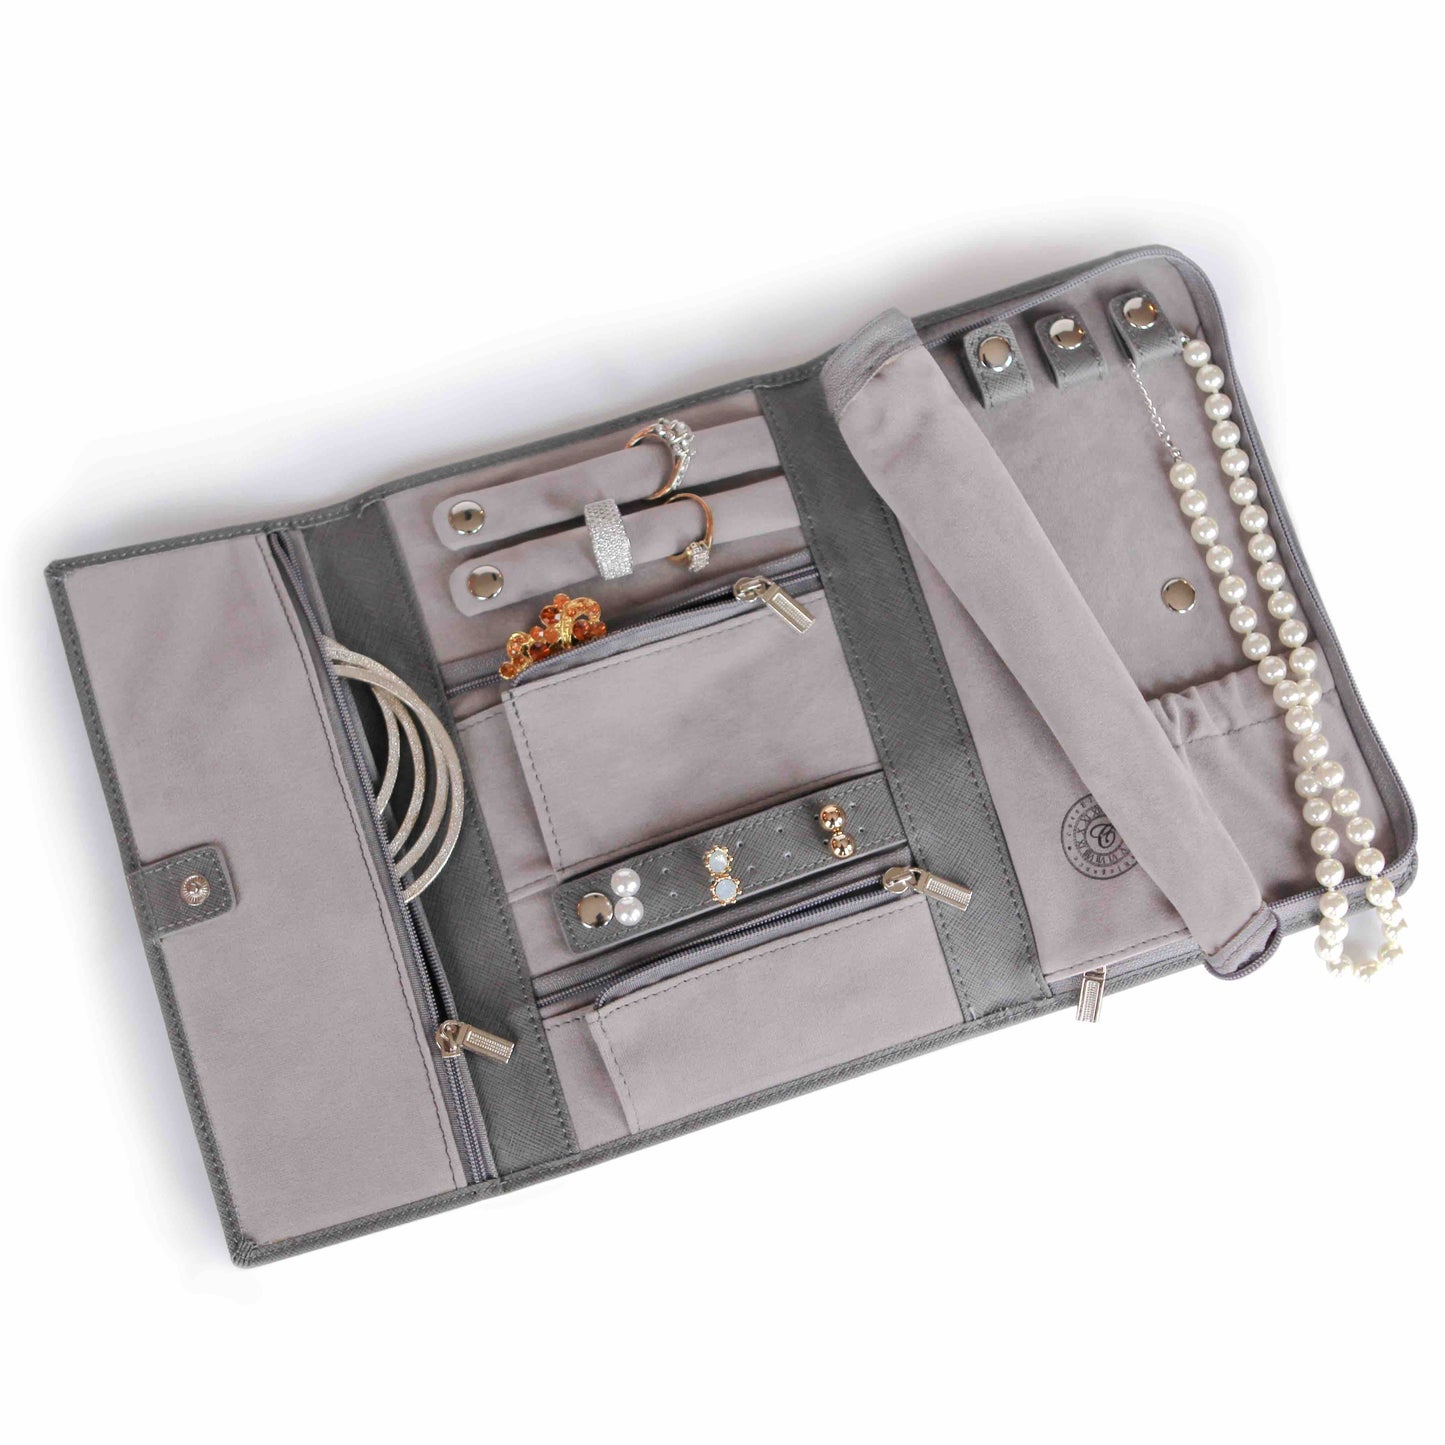 Travel Jewelry Wallet - Saffiano Leather